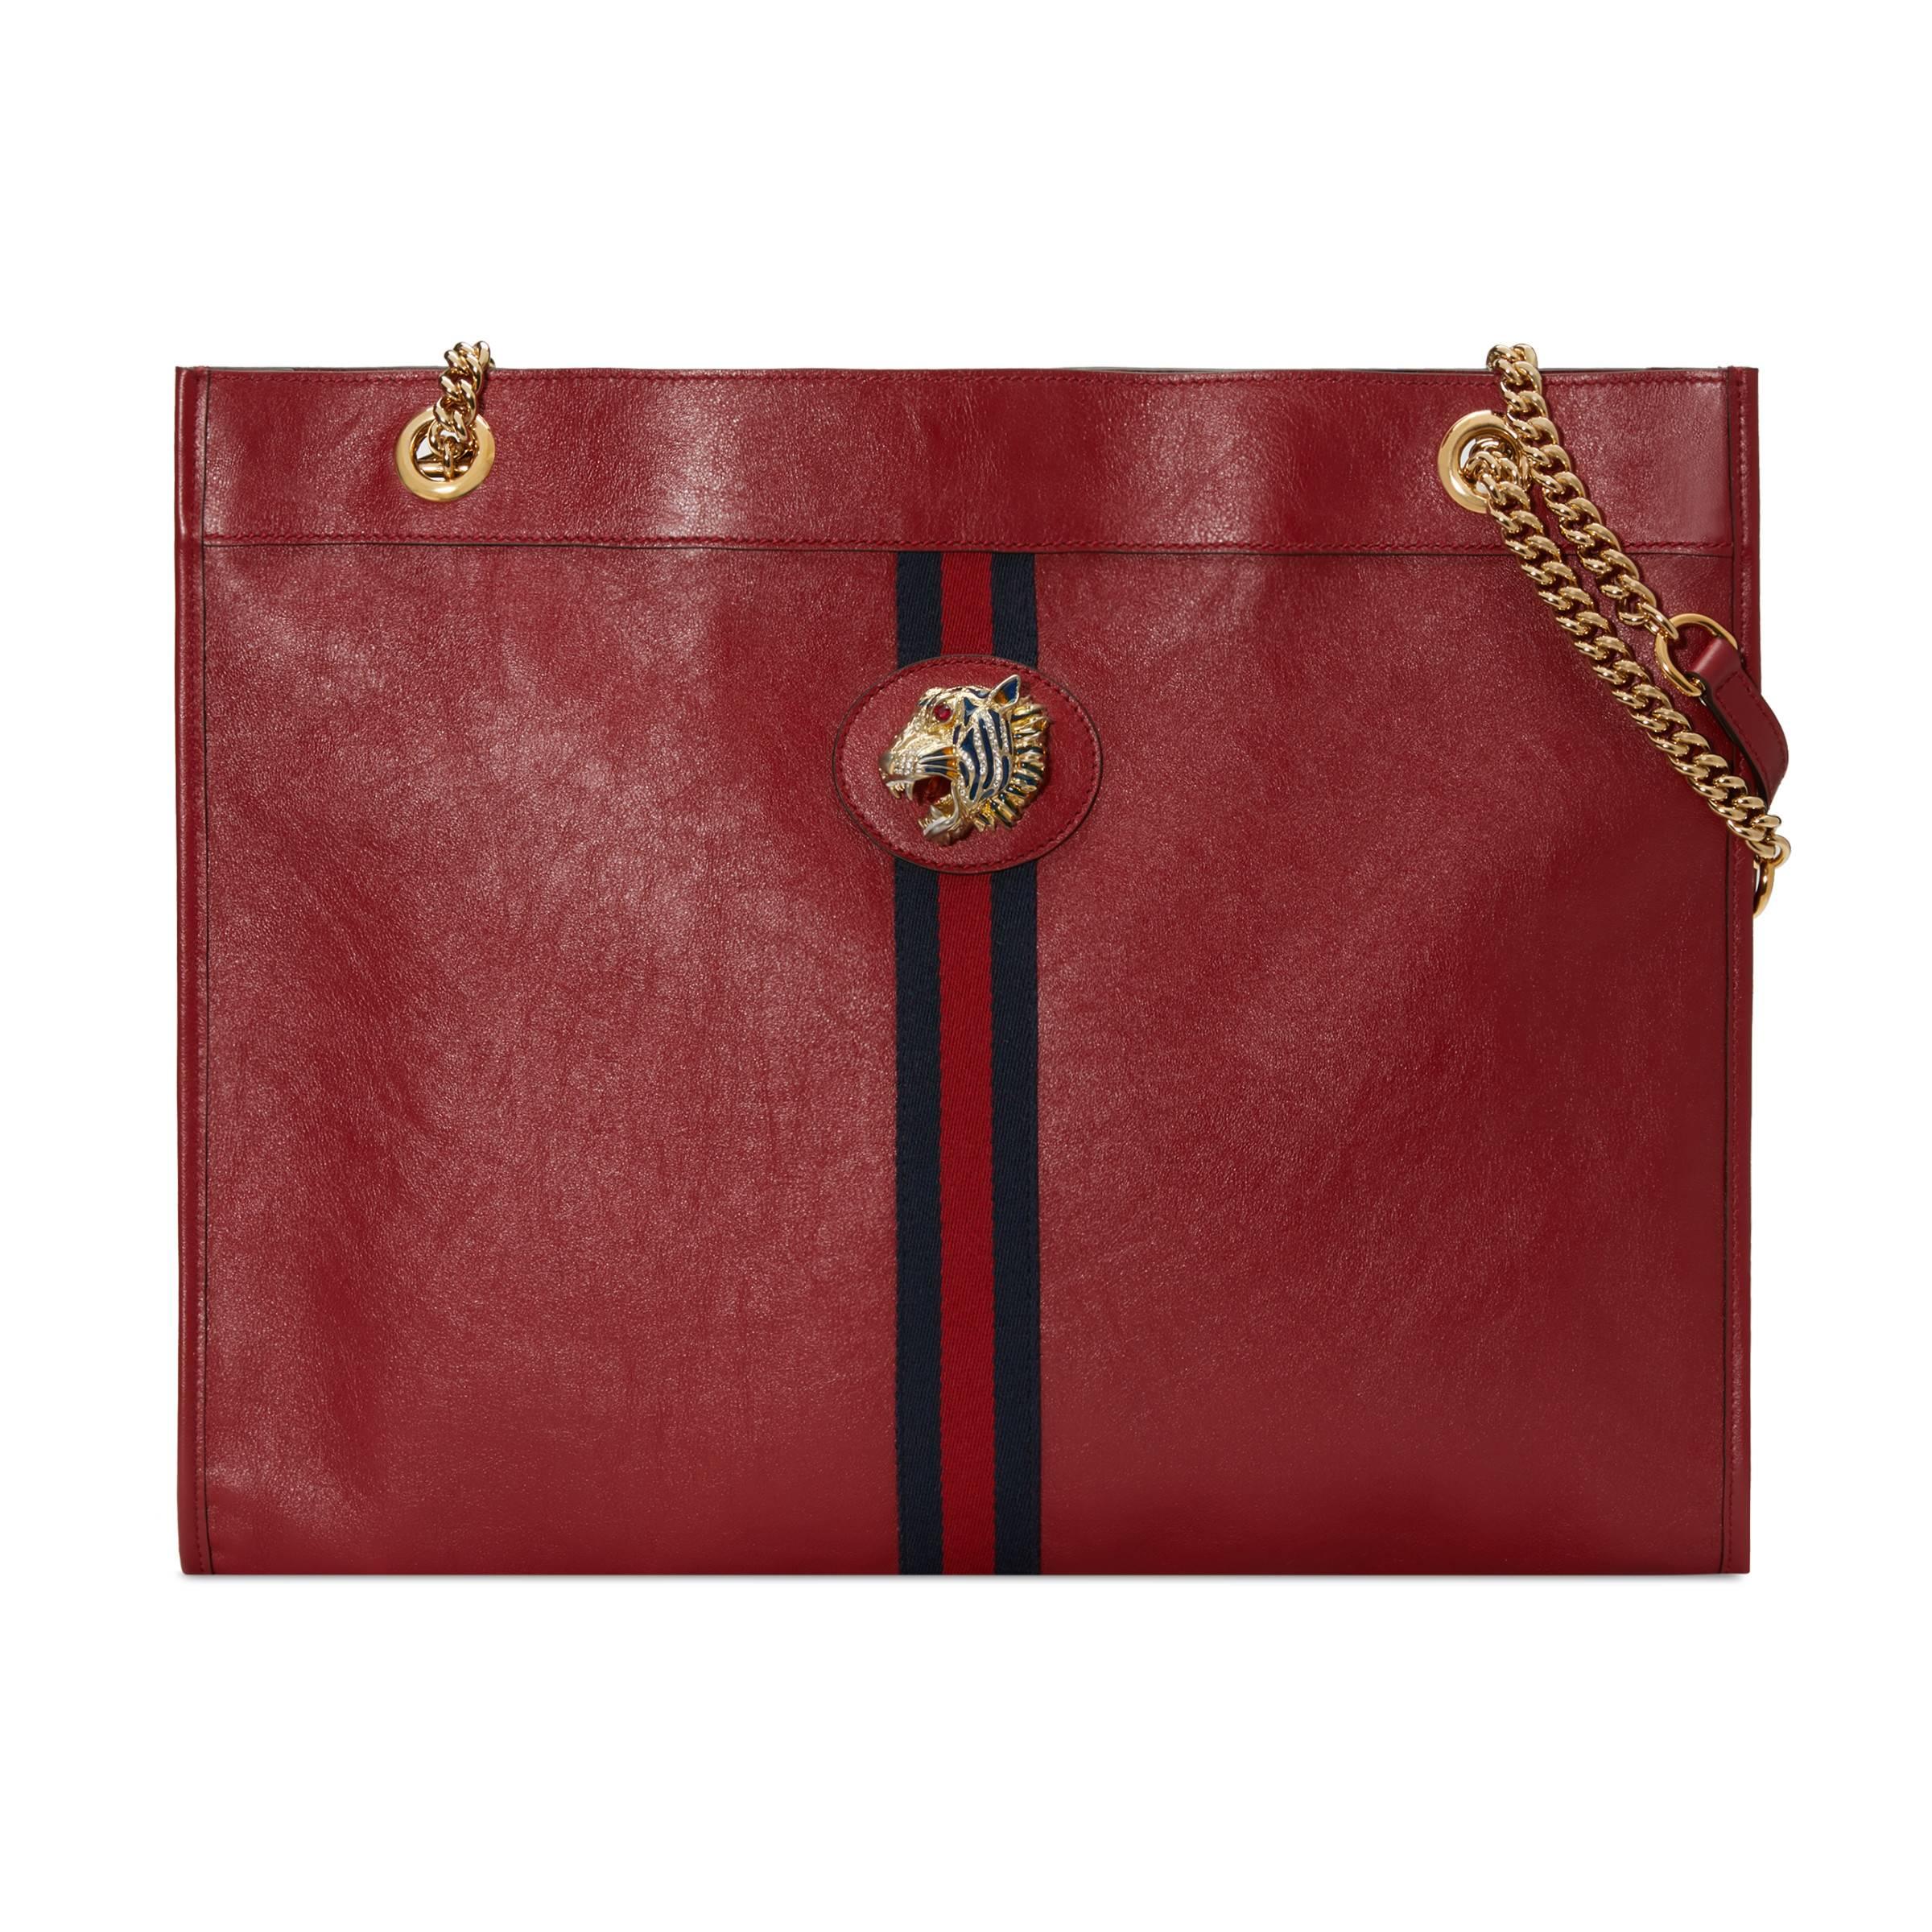 Gucci Leather Rajah Large Tote in Red | Lyst